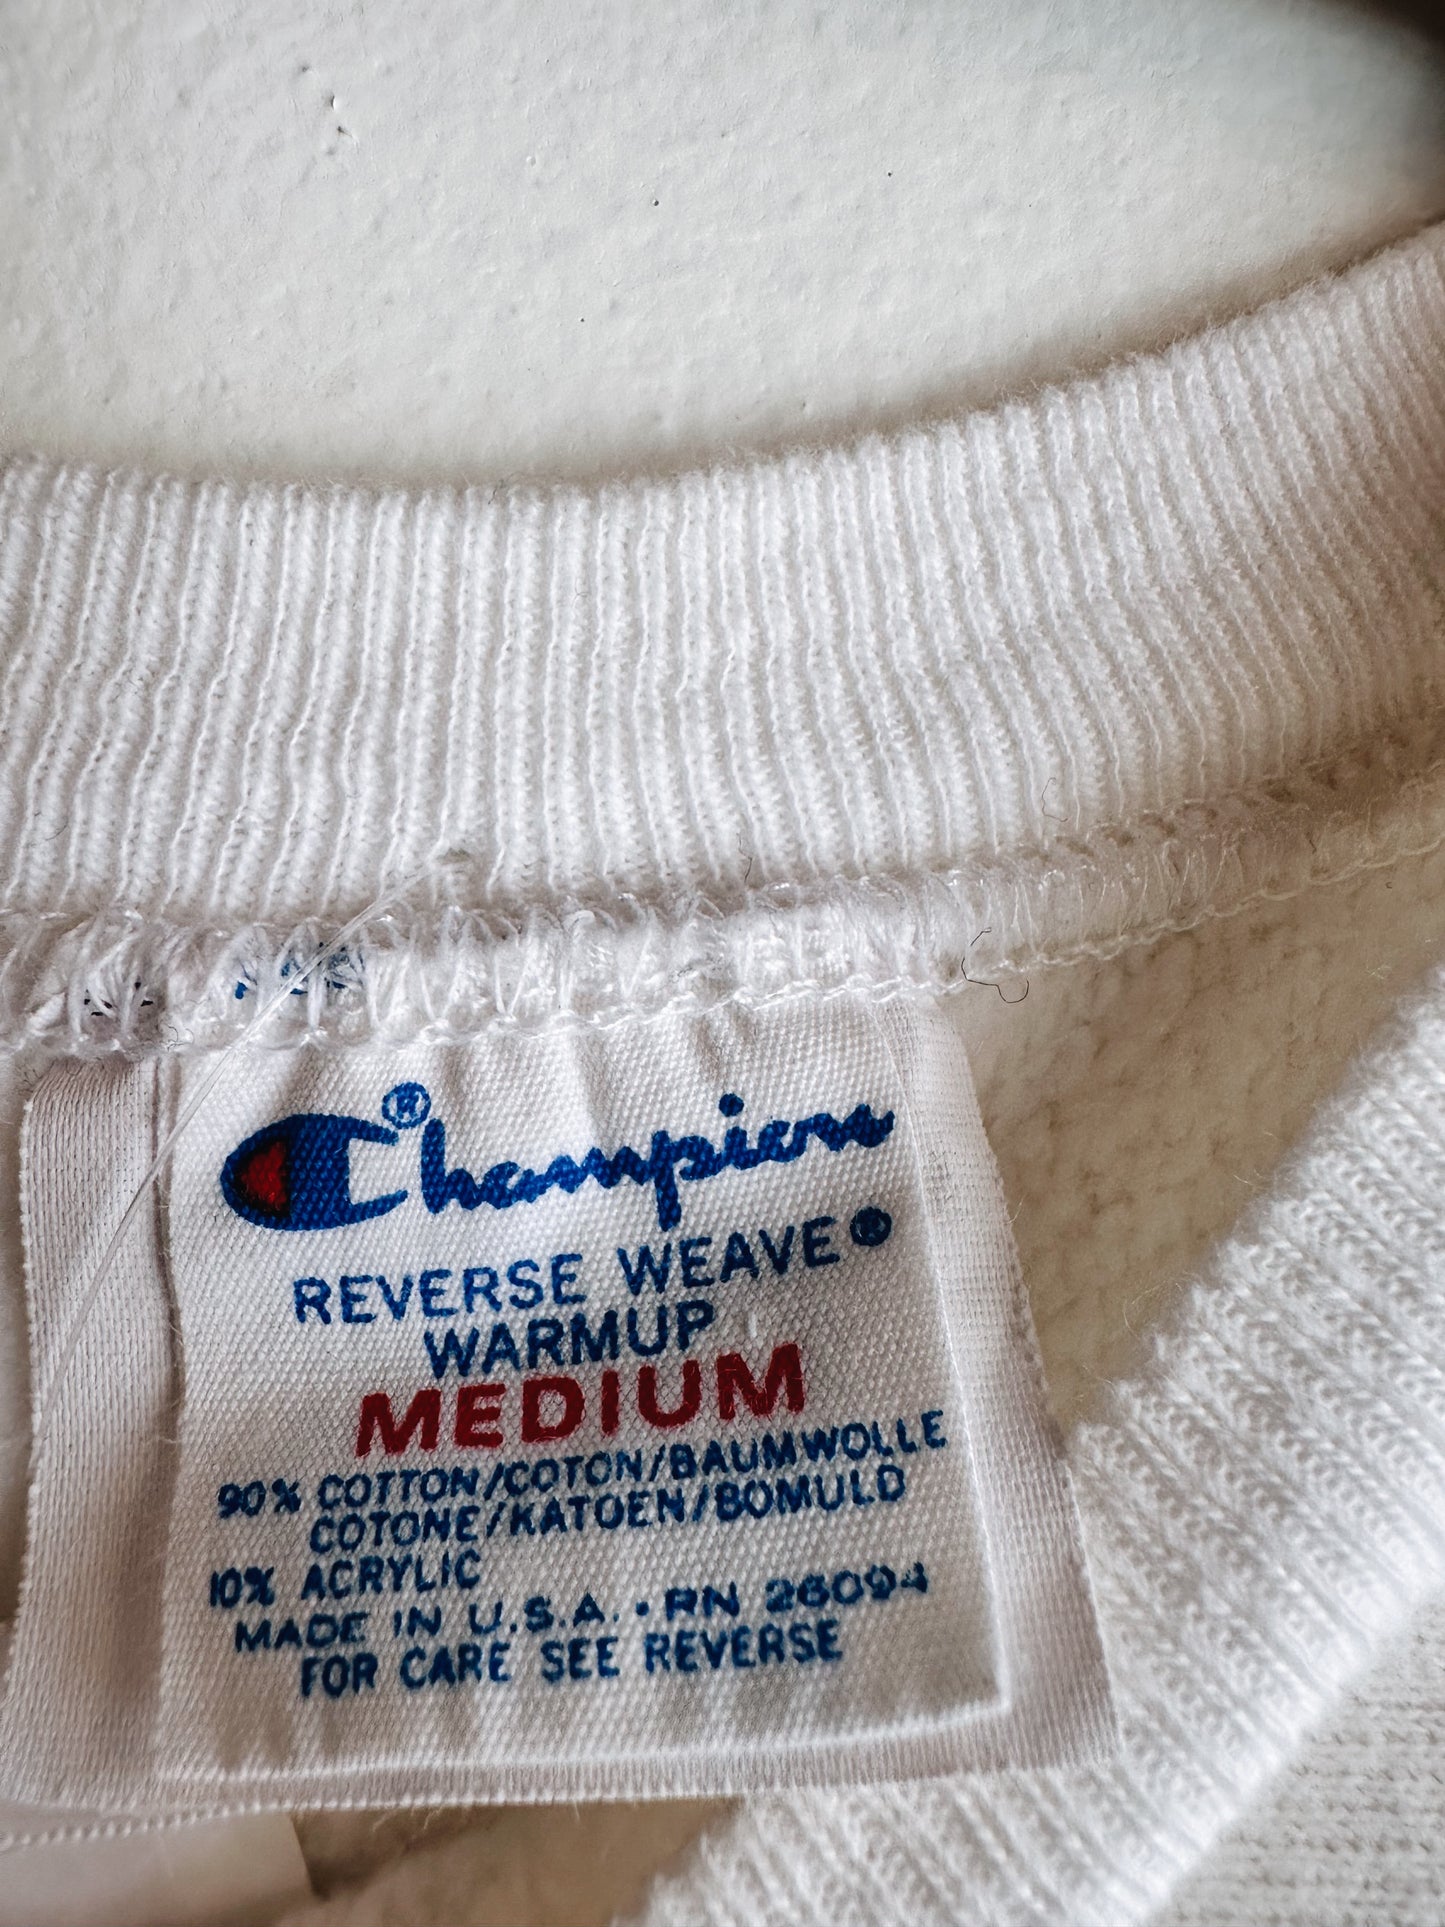 tag view - champion reverse weave warm up medium 90% cotton 10% acrylic made in usa rn 26094